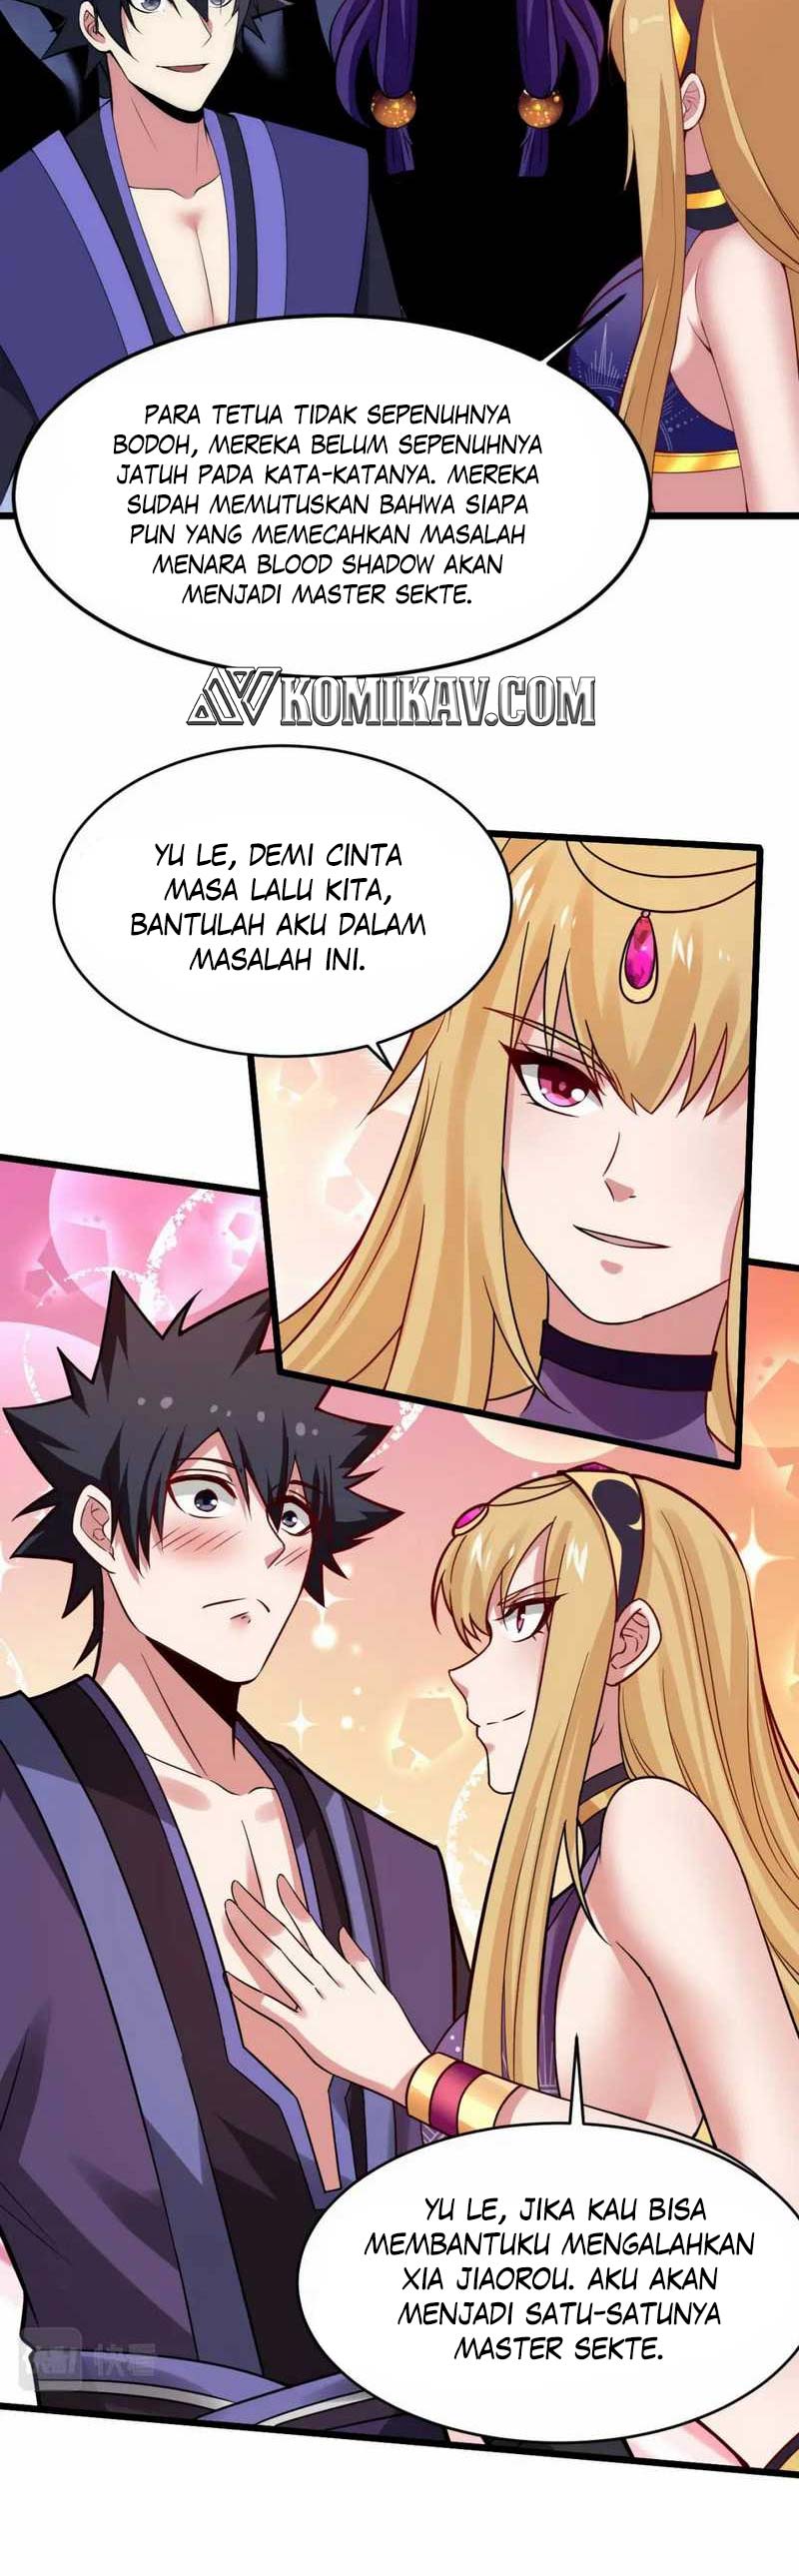 Dilarang COPAS - situs resmi www.mangacanblog.com - Komik i just want to be beaten to death by everyone 132 - chapter 132 133 Indonesia i just want to be beaten to death by everyone 132 - chapter 132 Terbaru 11|Baca Manga Komik Indonesia|Mangacan